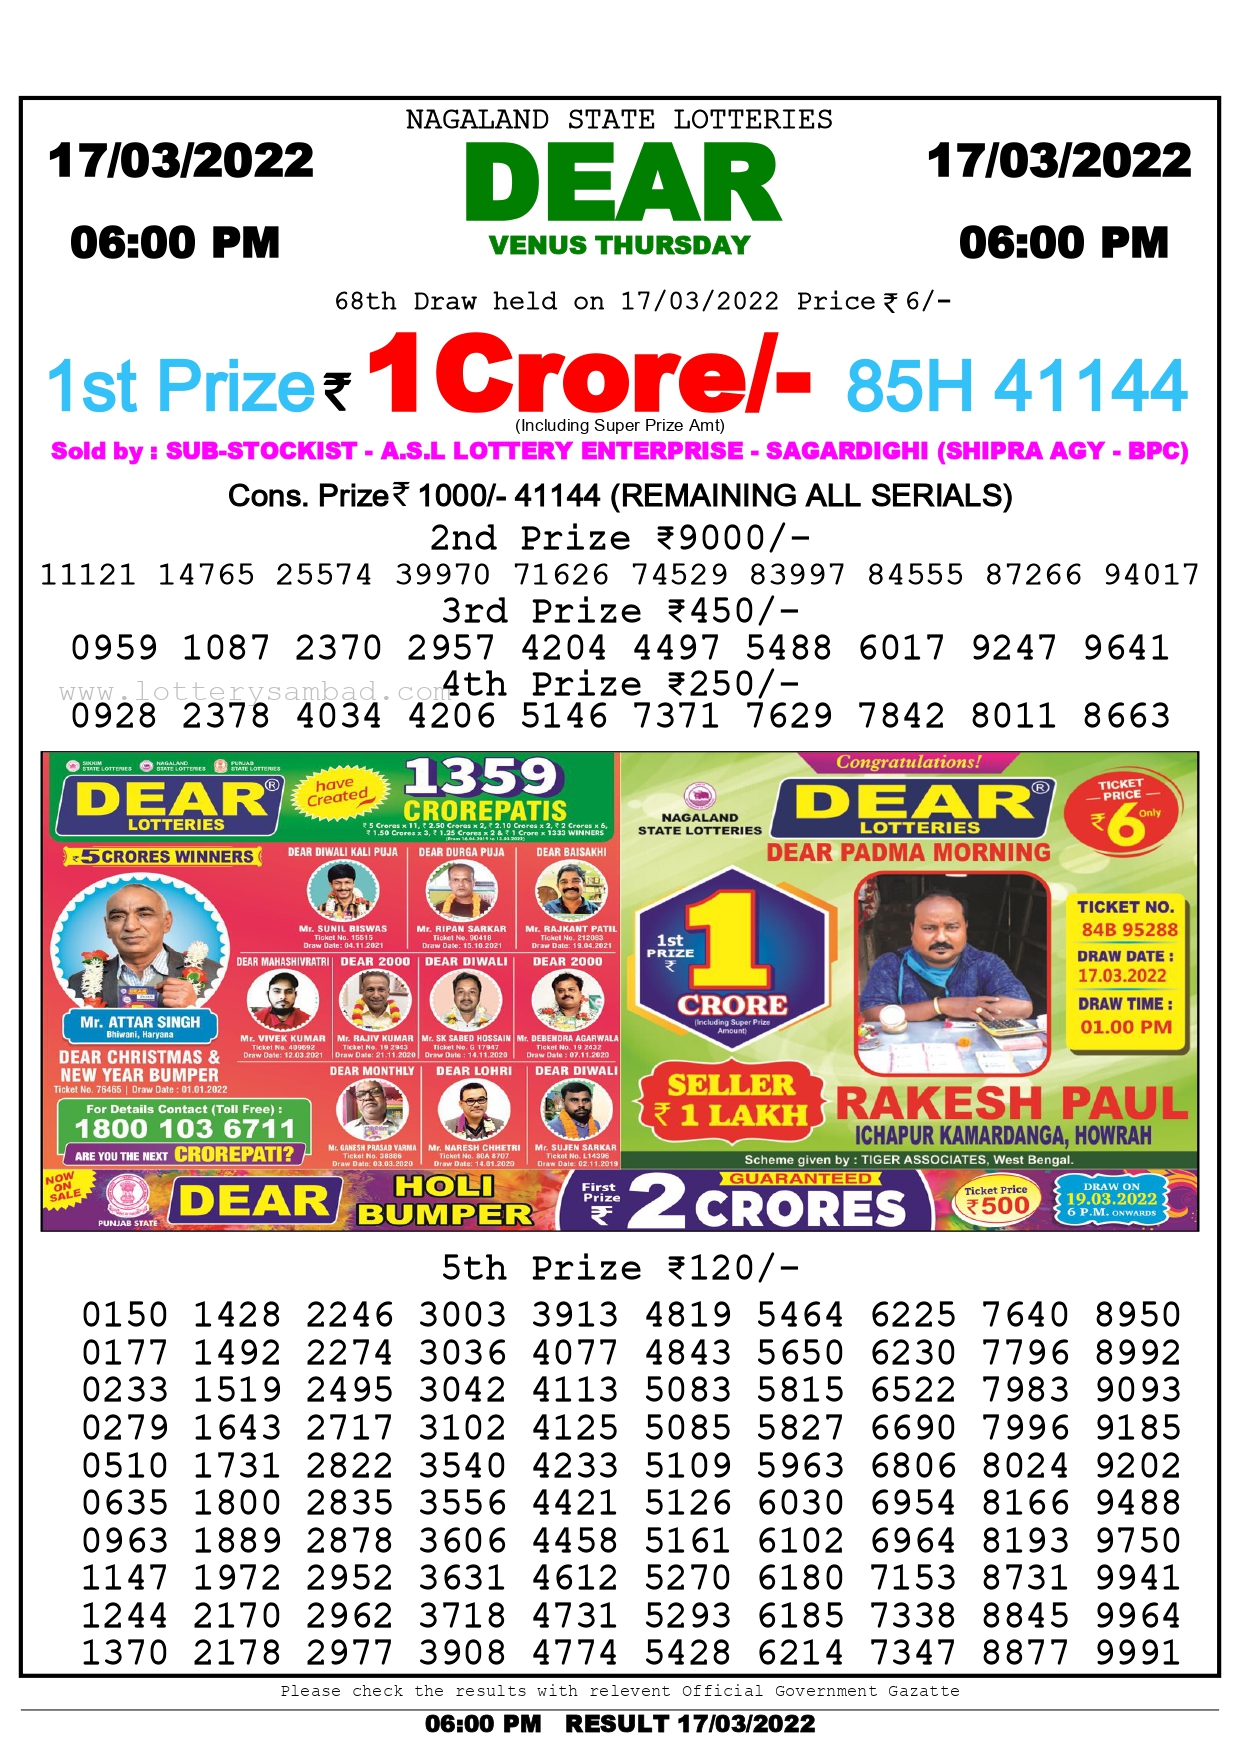 Download Result of Nagaland State Dear 6 On 16-03-2022 at 6:00Pm Results :https://punjablottery.in/results Lottery Buy at https://punjablottery.in Lottery Buy at https://dailylotteries.in Results https://punjablottery.in/2022/03/17/download-result-of-nagaland-state-dear-6-17-03-2022-draw-at-100pm/ #deardailylottery #punjabstatelotteries #nagalandstatedailylottery #dearlotteryresultslive #nagalandstatelotteries #dearliveresults #lotterysambadliveresults #punjabstatelottery #dearlotteriesliveresults #deardailylottery #deardailylotterie #nagalandstatelotteries #dearlotteries #nagalandlotteries #dearlottery #Deardailylottery #dailylottery #lotterysambadresults #WeeklyLottery #nagalandweeklylotteries